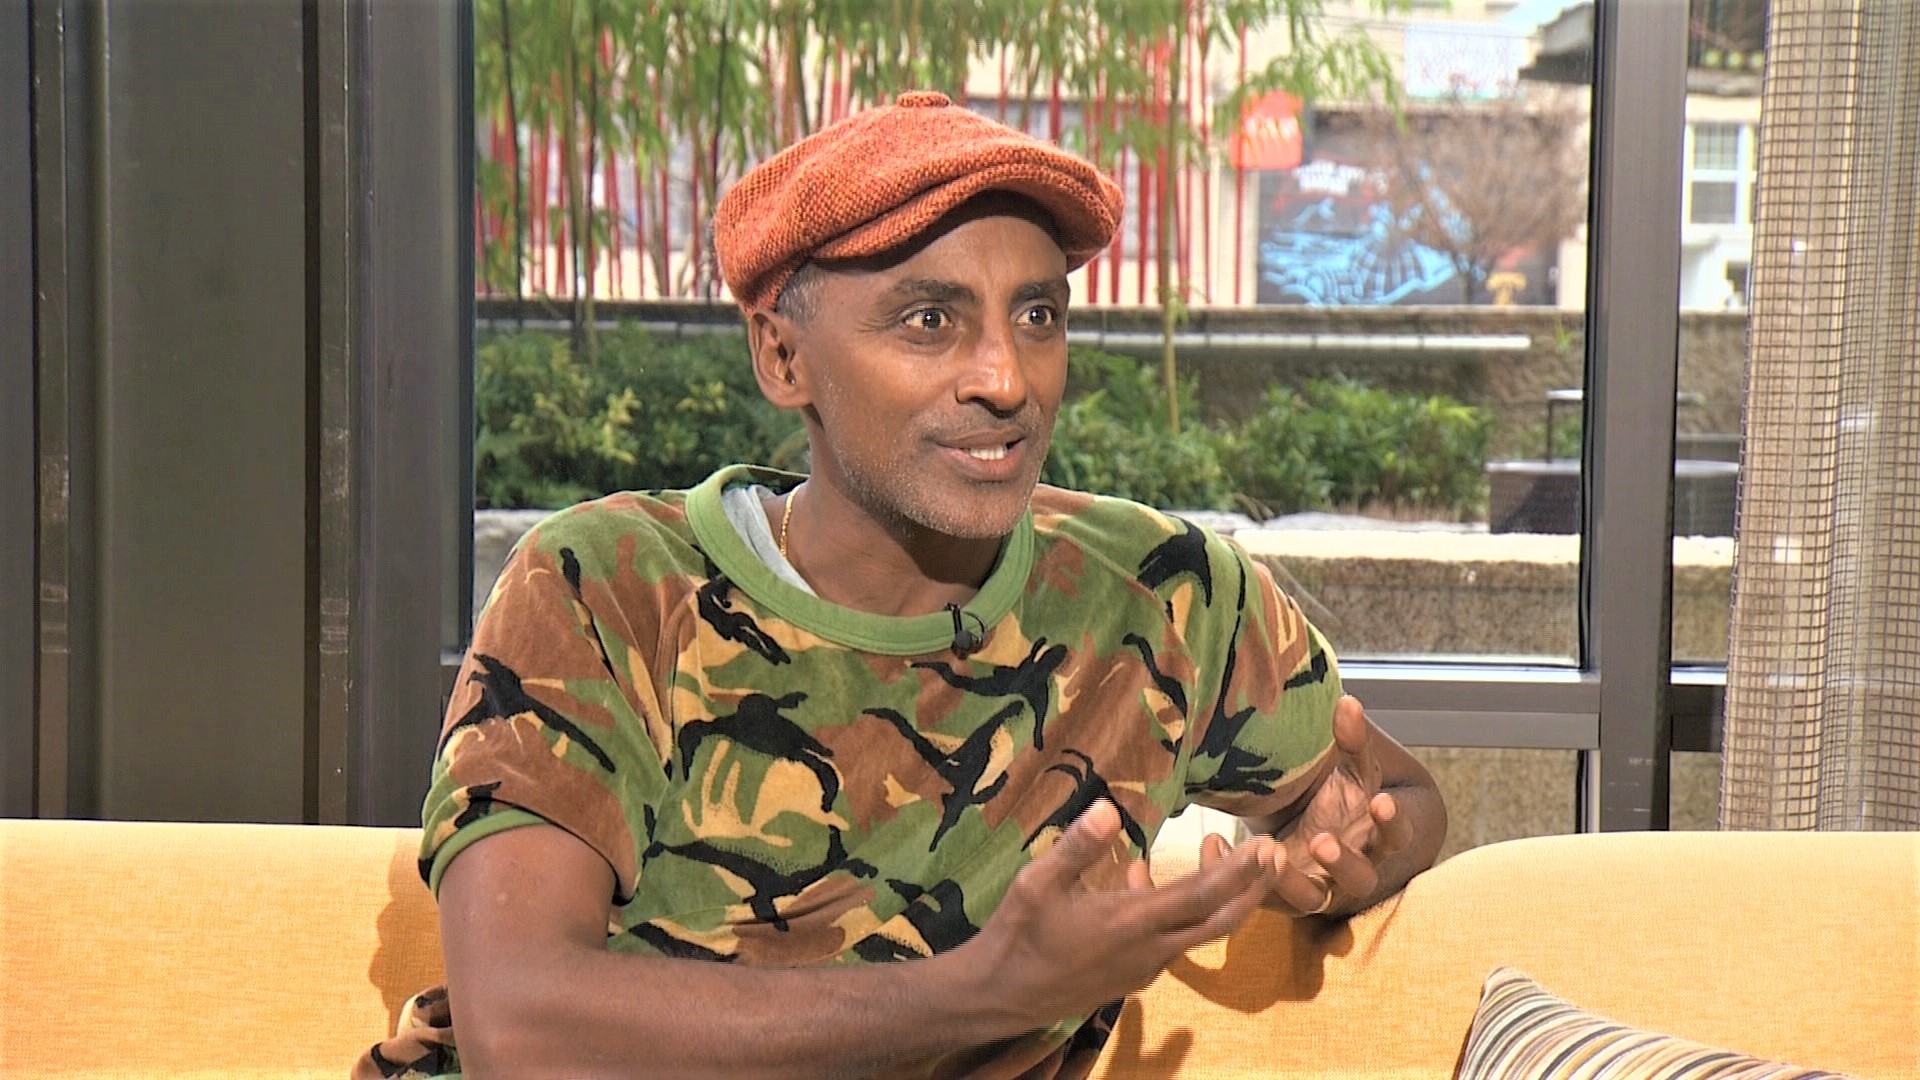 Restaurateur Marcus Samuelsson explores our state which is the 5th largest Filipino community in the country.